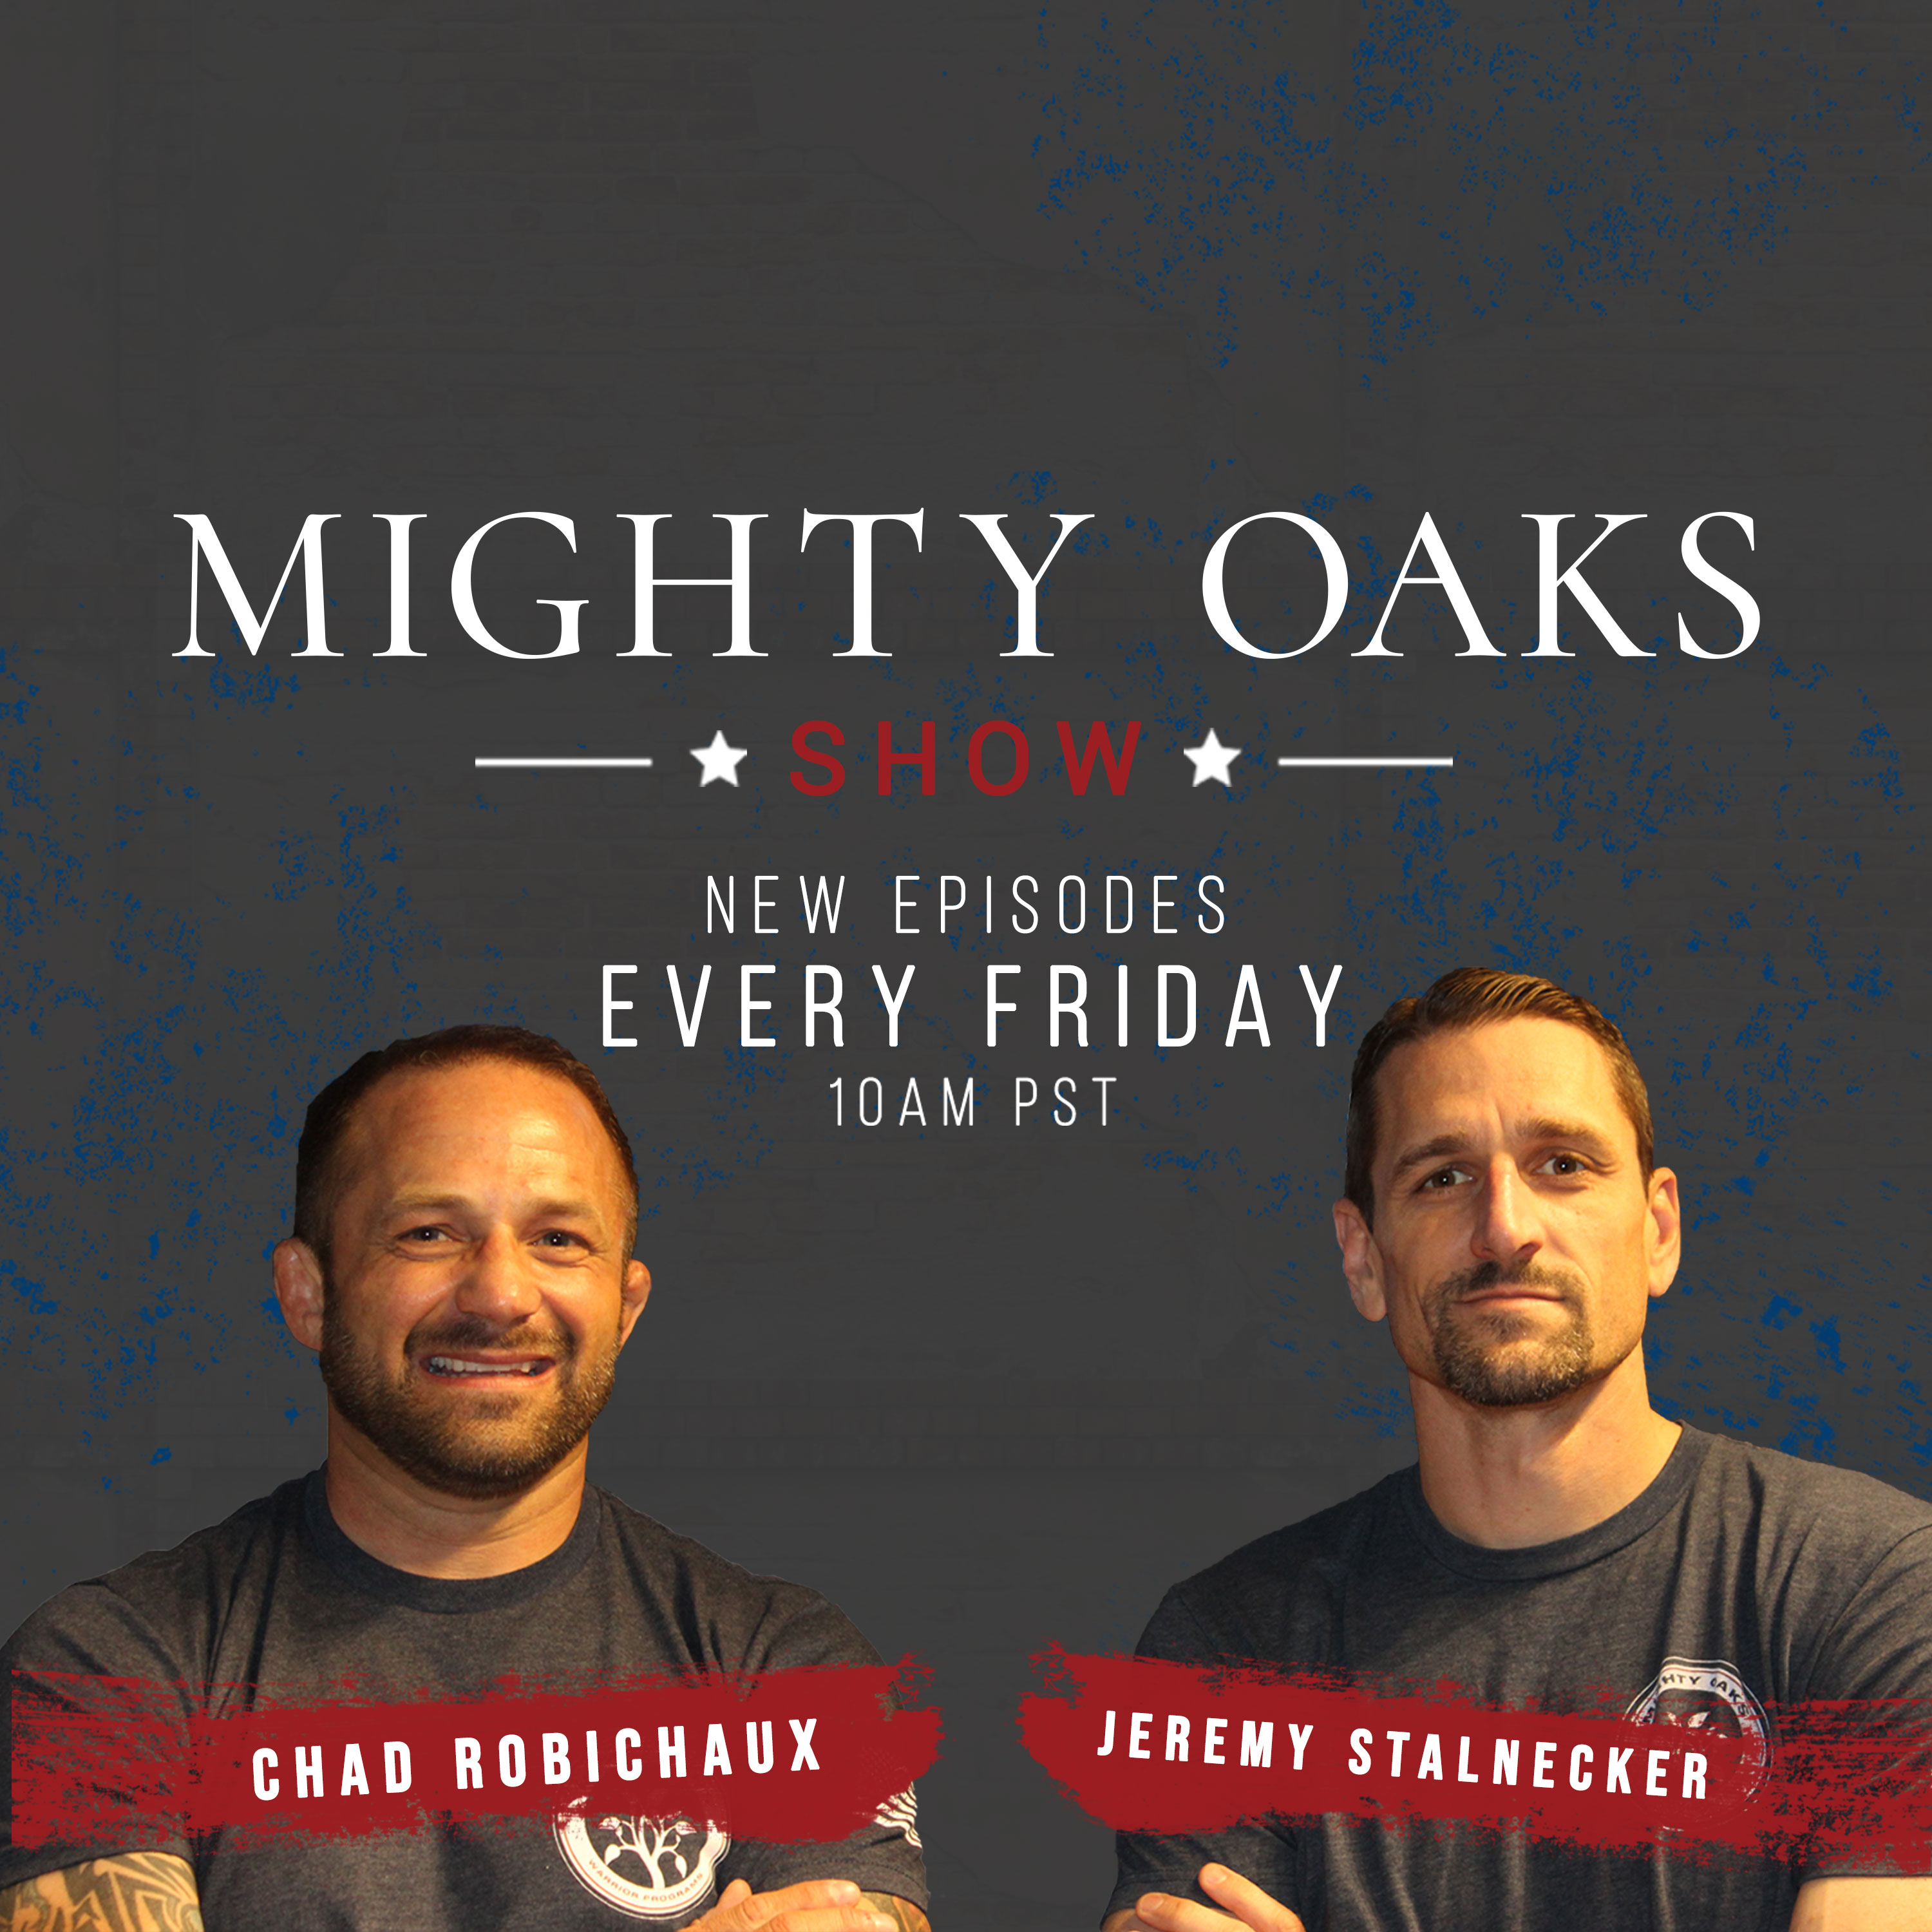 A highlight from Changing the Narrative Around Veteran Care with Lt. Col Daniel Gade PhD | Mighty Oaks Show 128